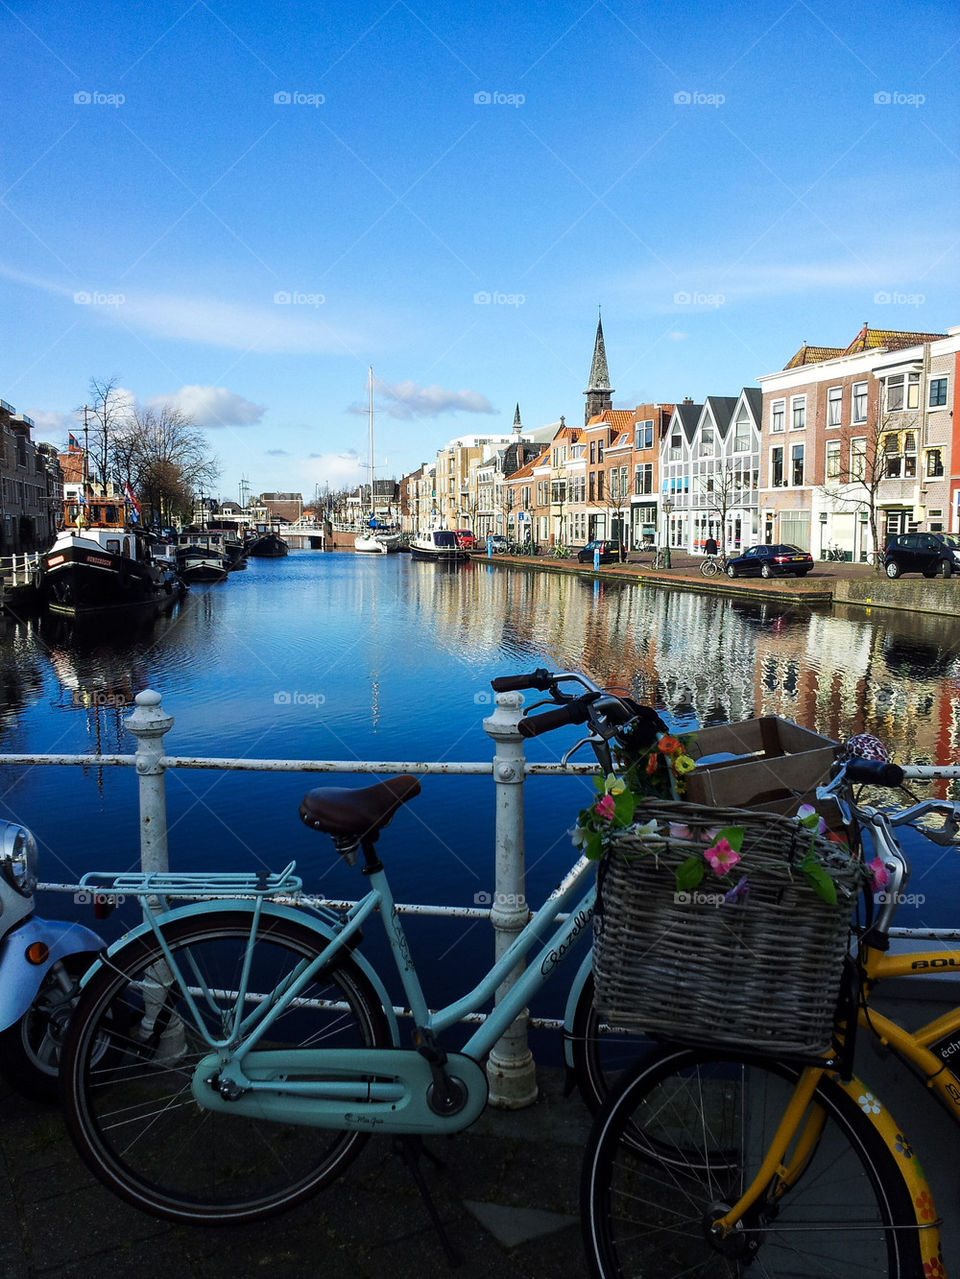 Colorful bikes at a canal in Leiden